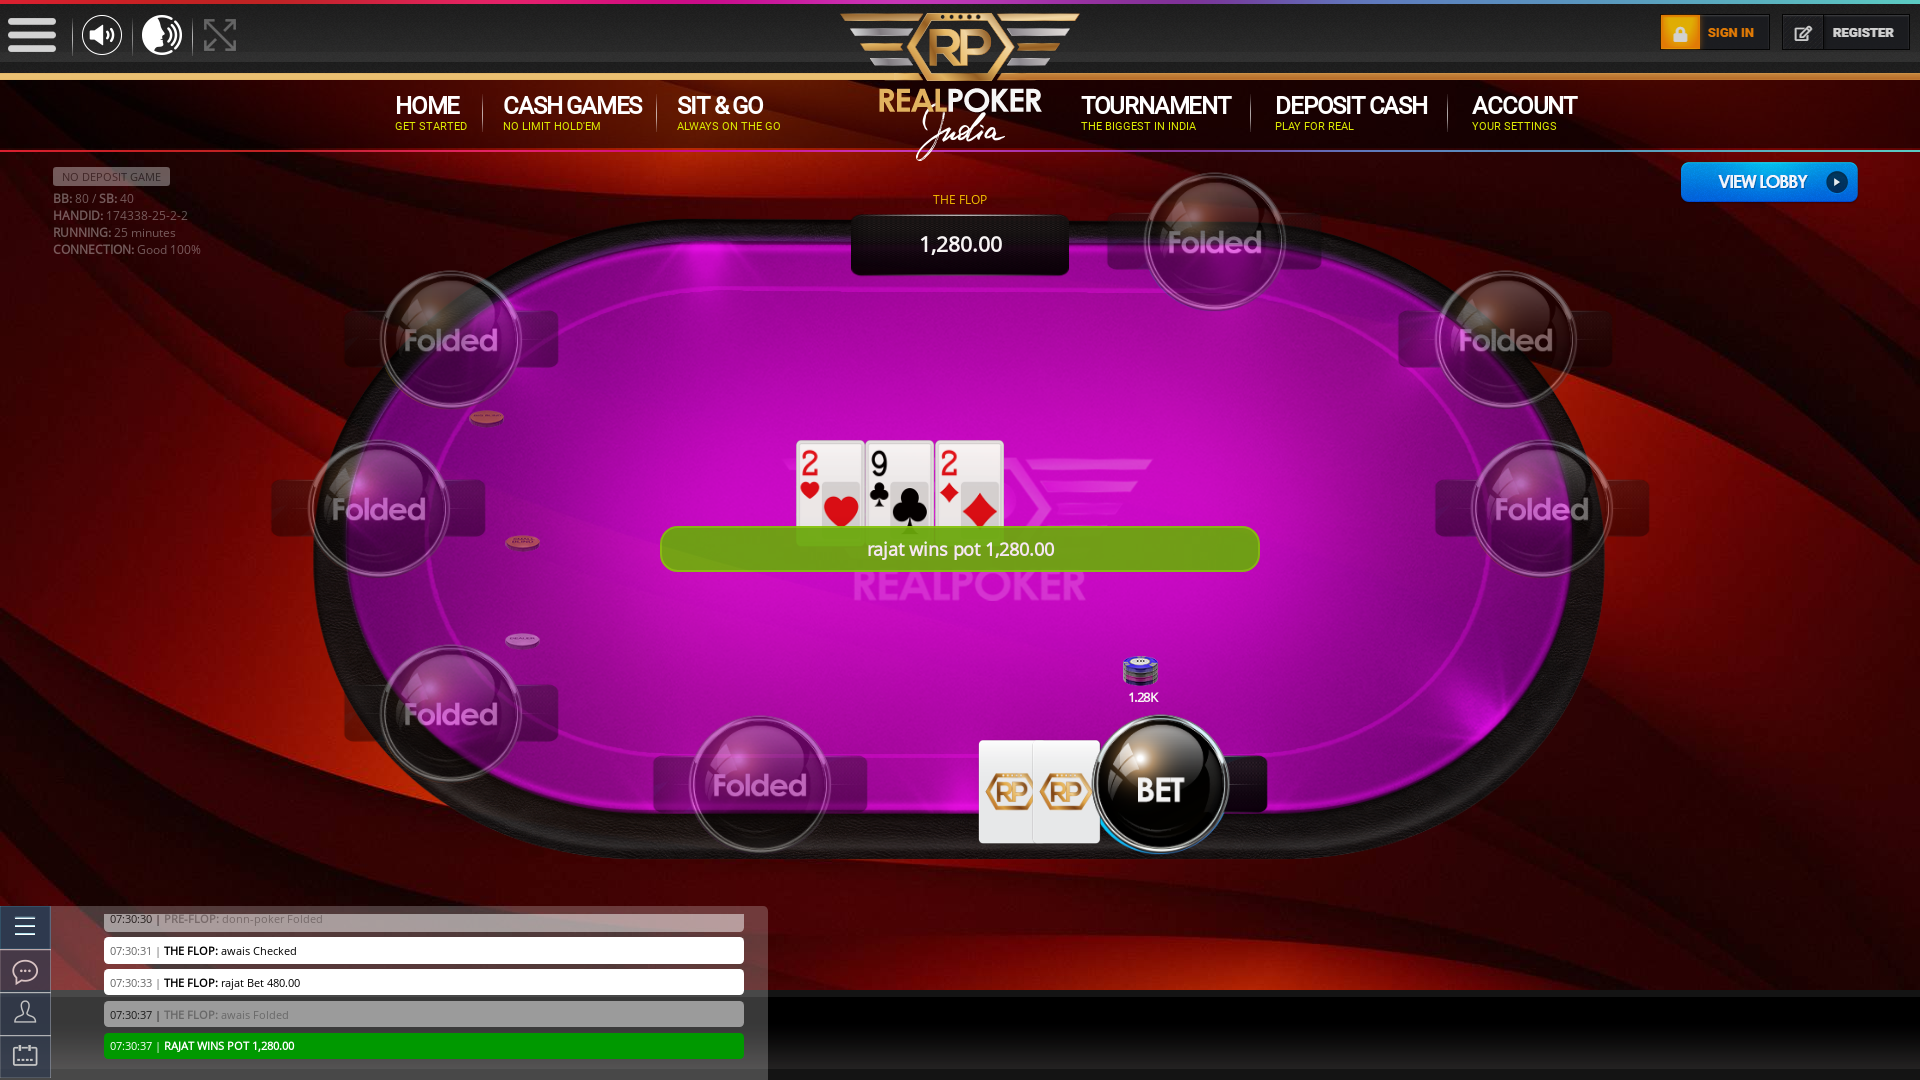 Indian online poker on a 10 player table in the 25th minute match up